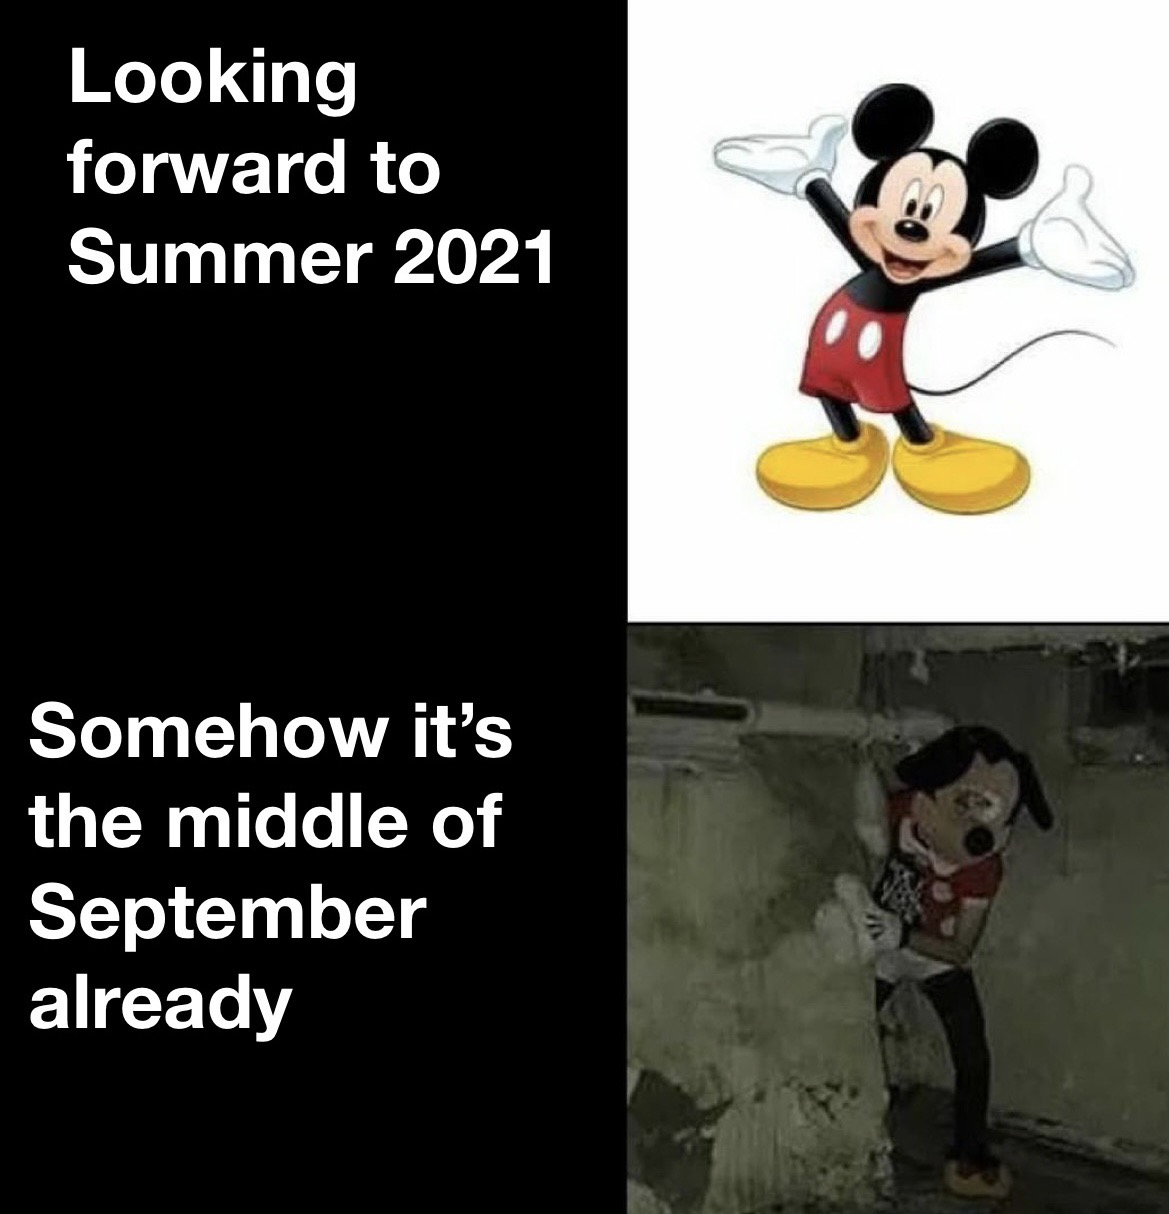 mickey mouse meme template - Looking forward to Summer 2021 Somehow it's the middle of September already